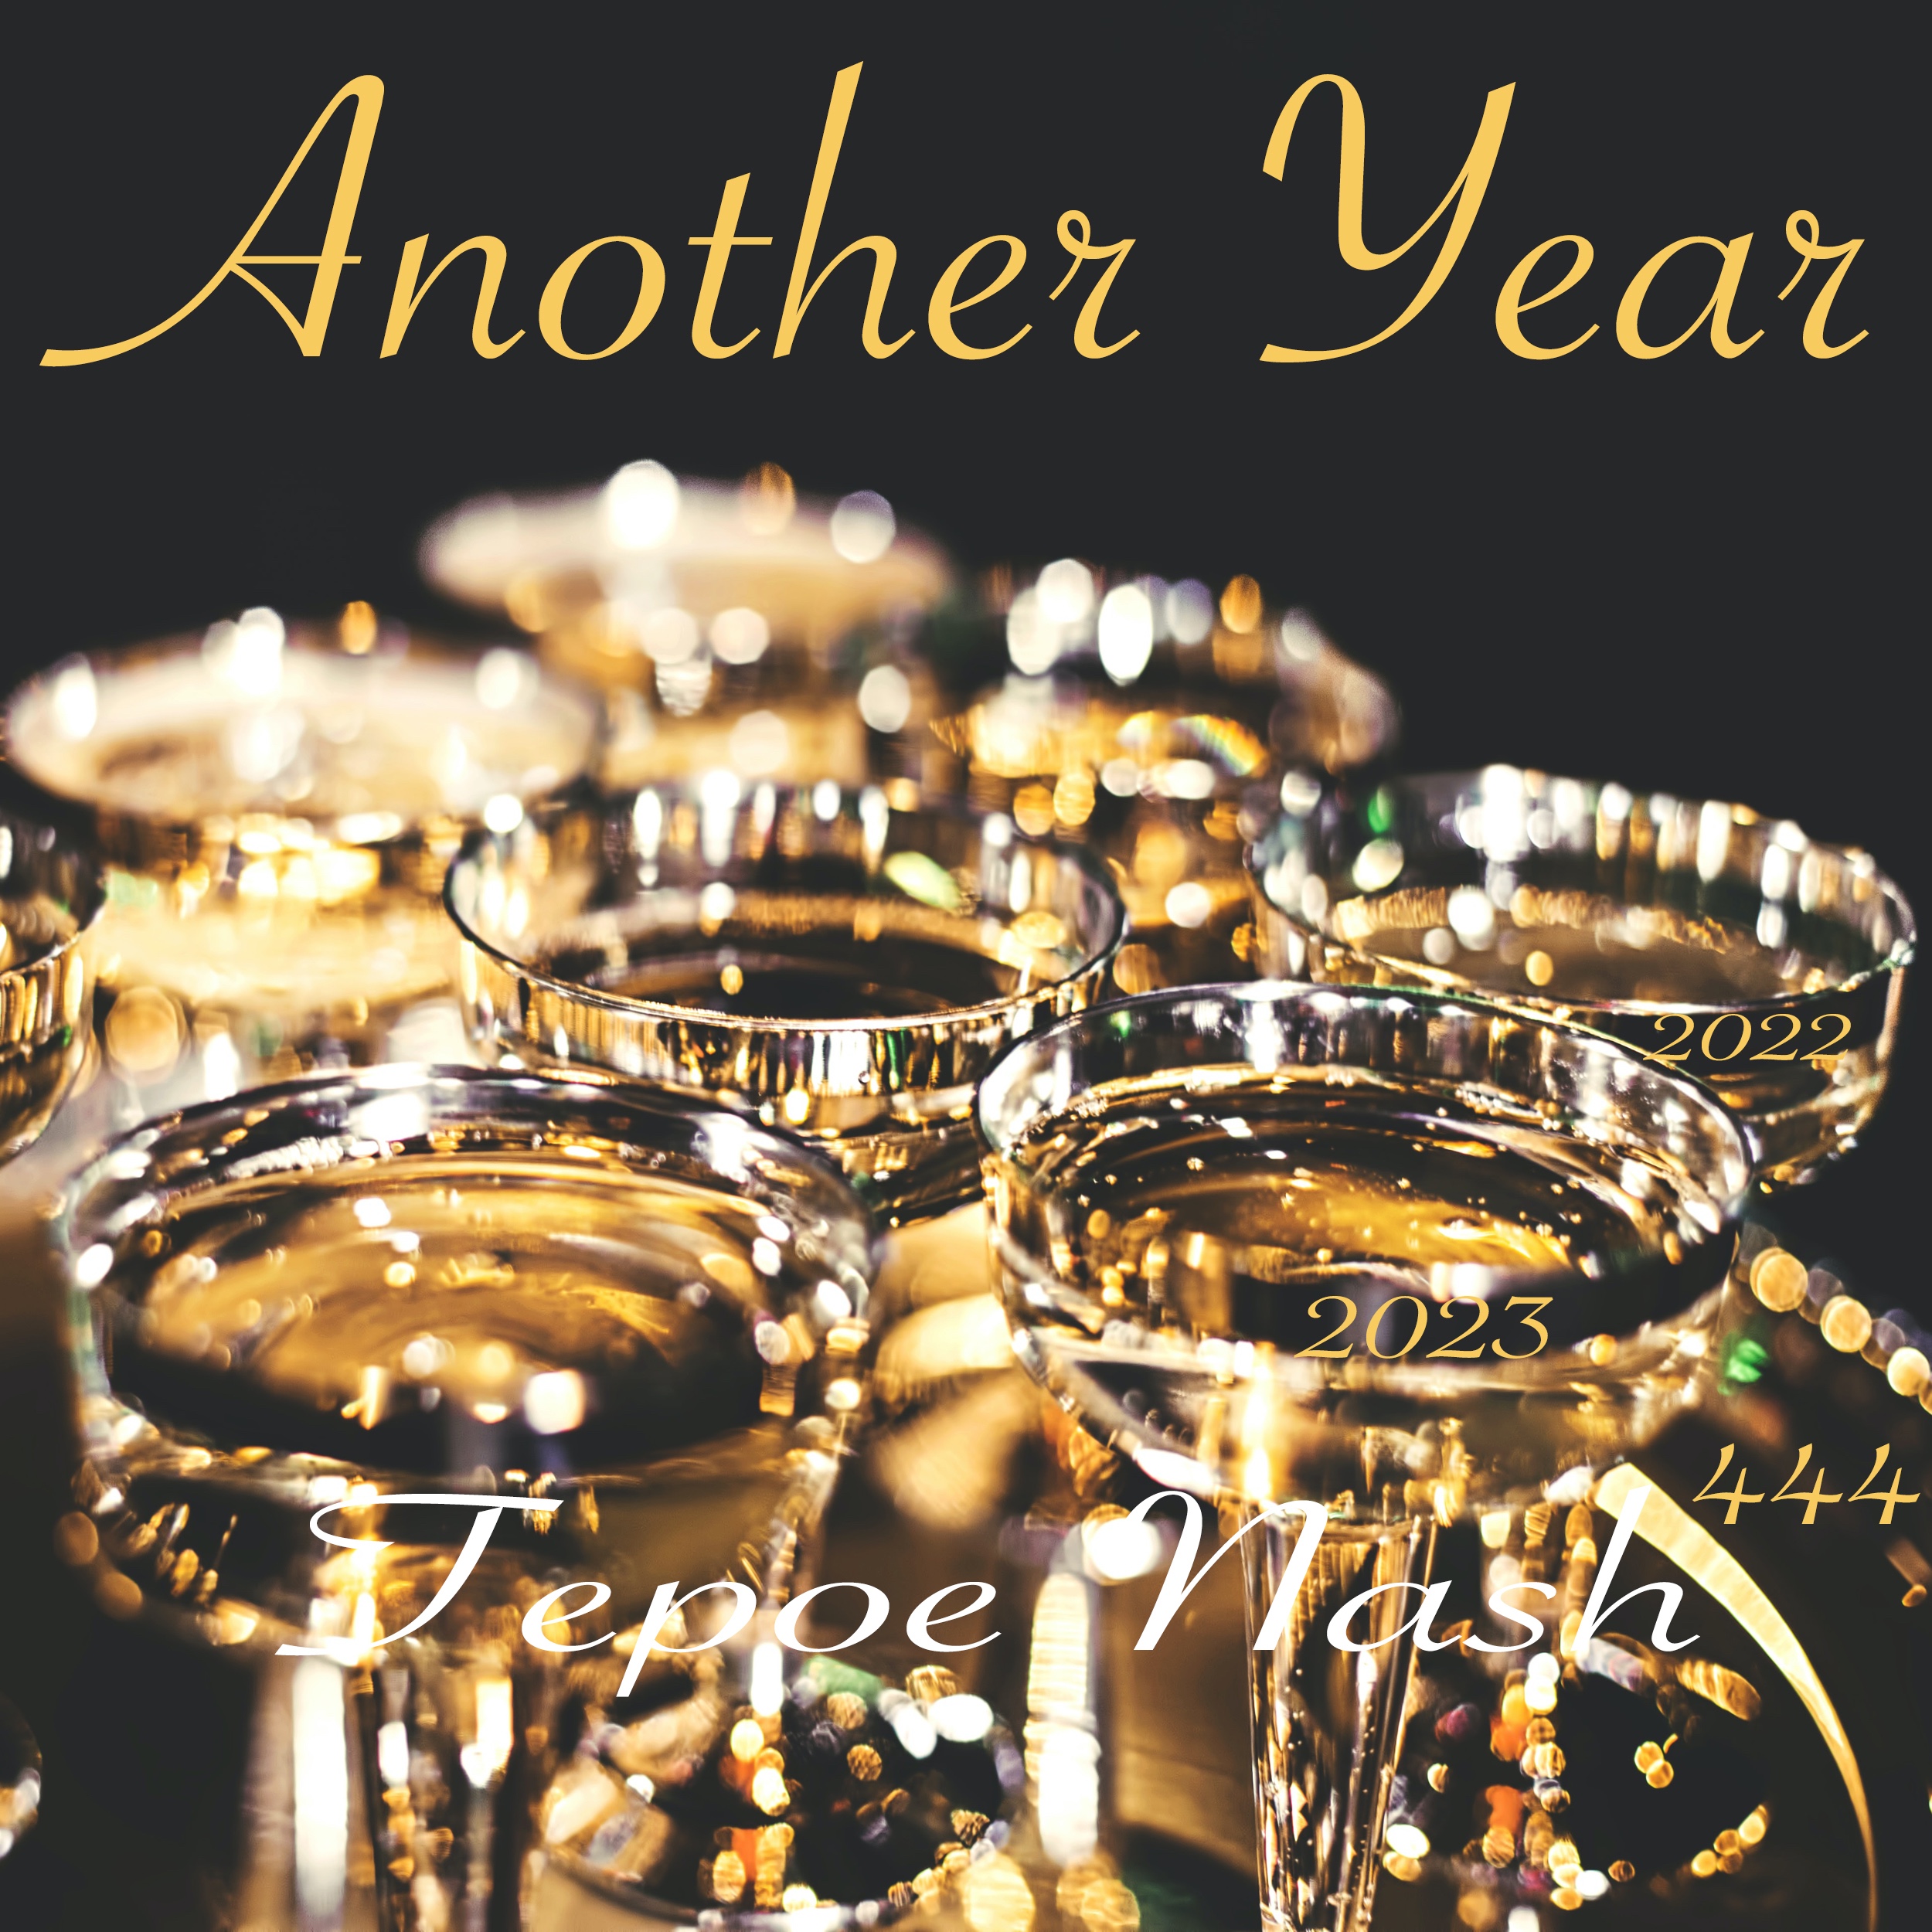 Celebrating Life and Ushering the New Year with Mellow Americana and Soft Rock - Tepoe Nash Drops "Another Year"